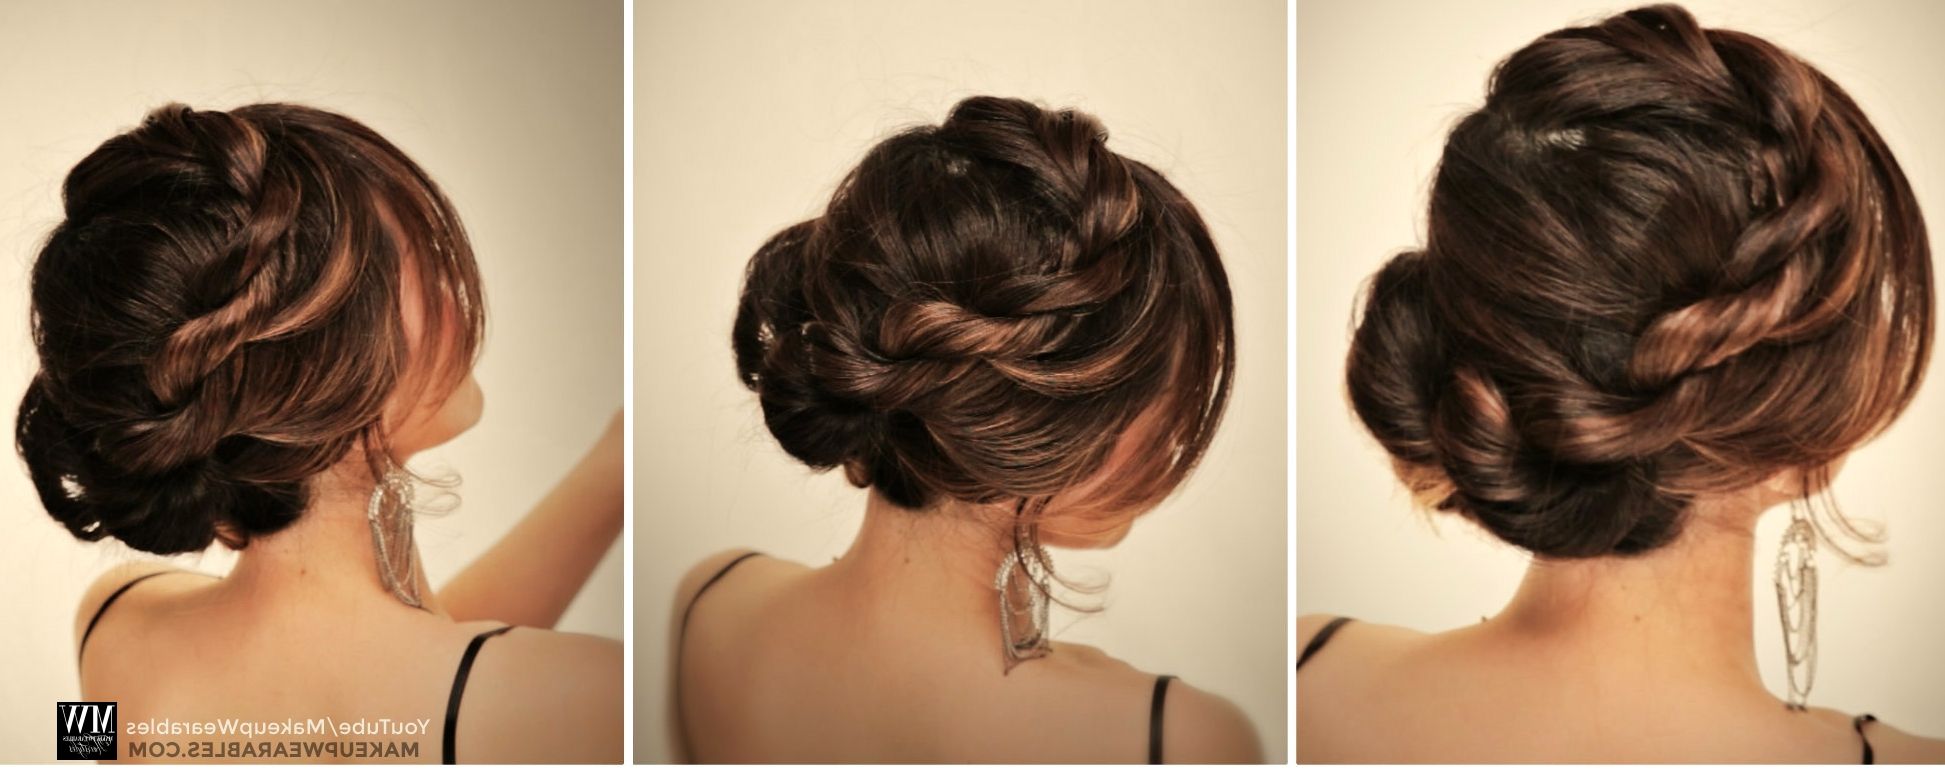 Current Simple Pony Updo Hairstyles With A Twist Pertaining To How To: 5 Amazingly Cute + Easy Hairstyles With A Simple Twist (View 14 of 20)